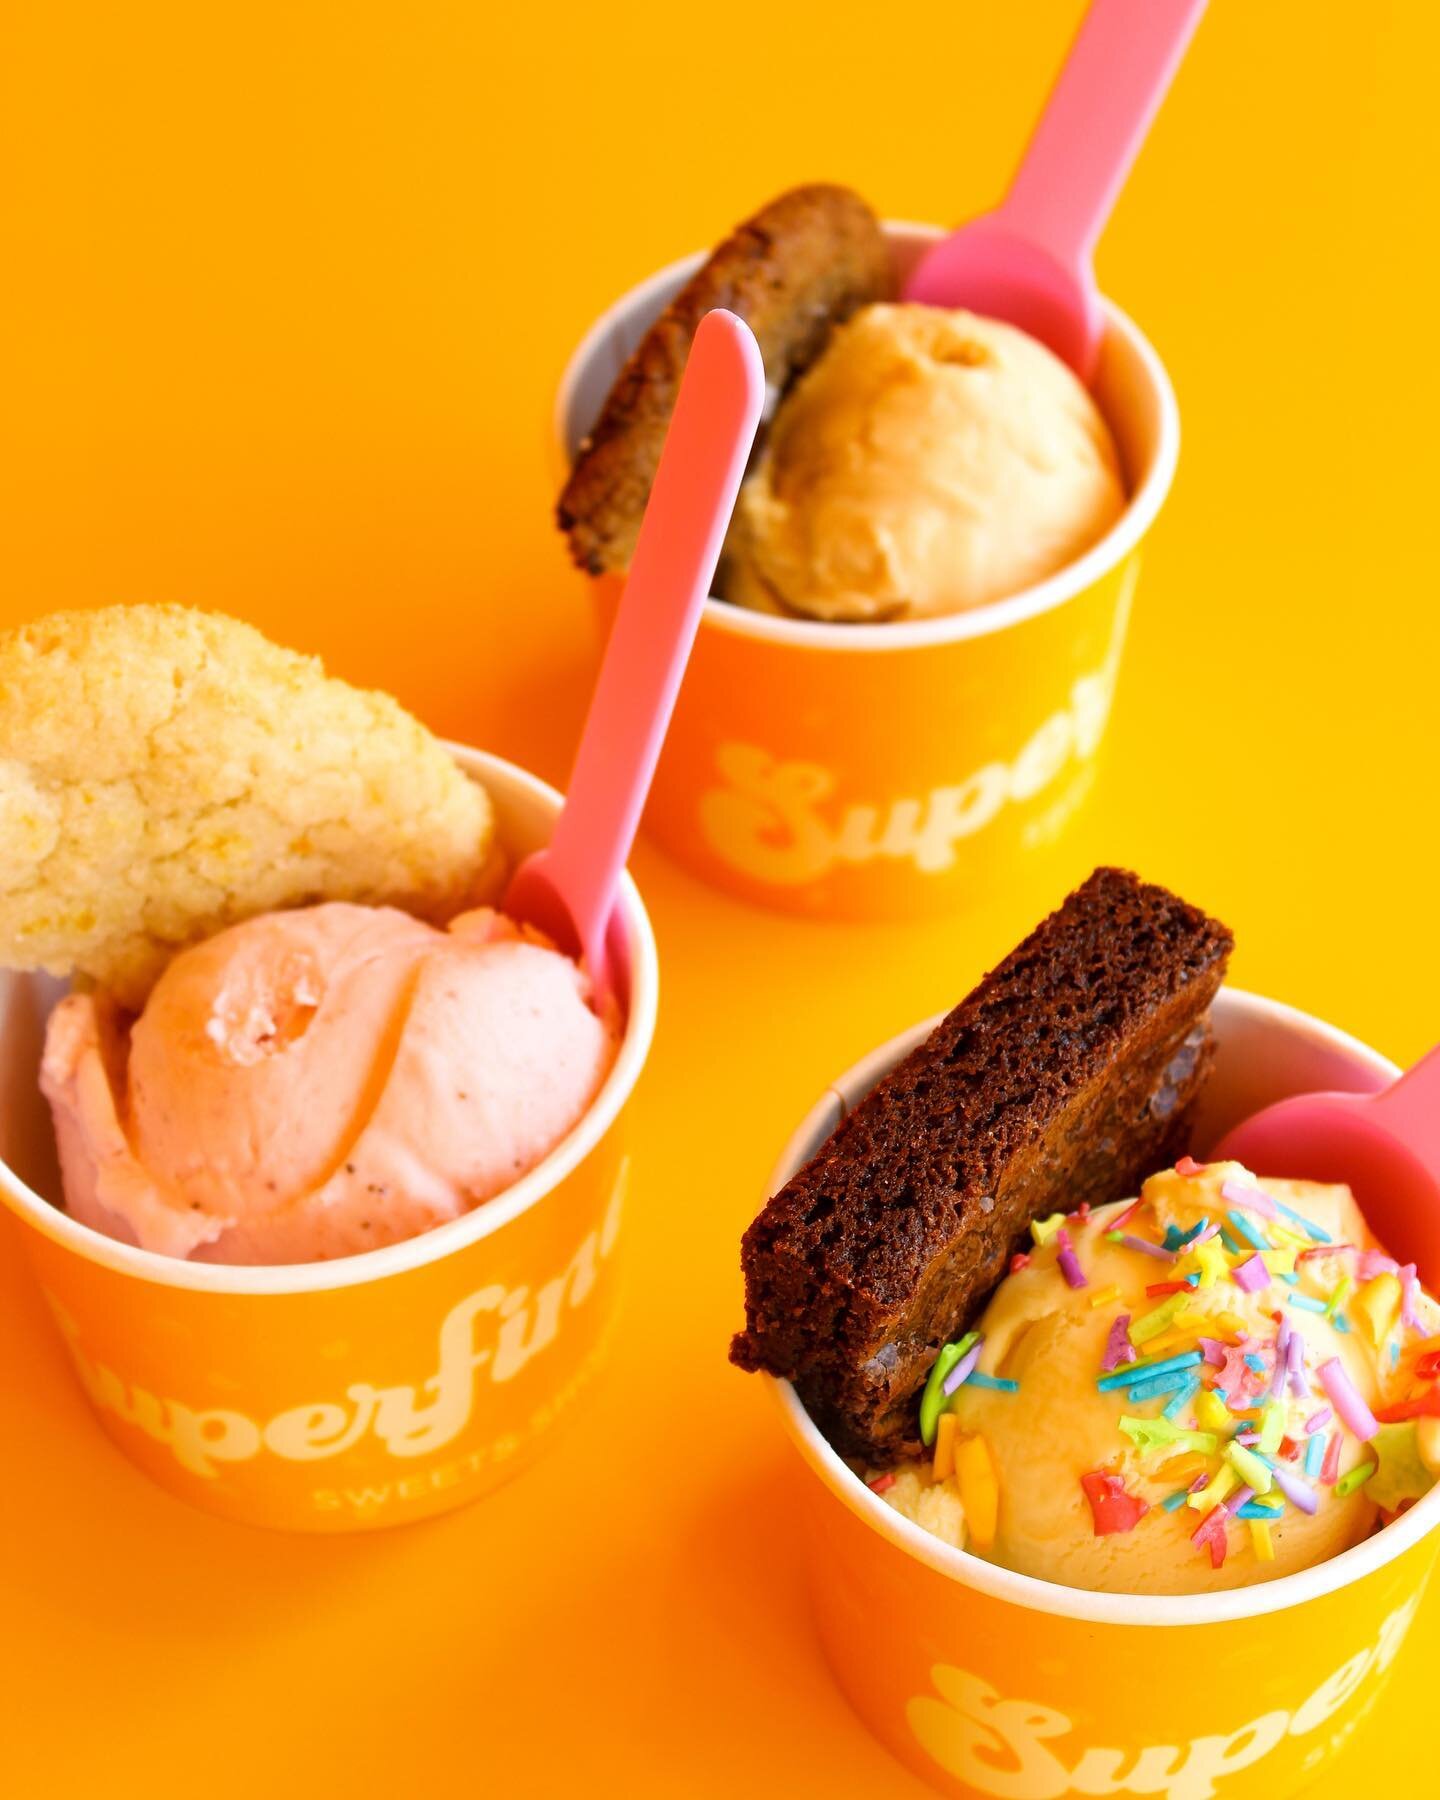 cups of ice cream with cookies and brownies